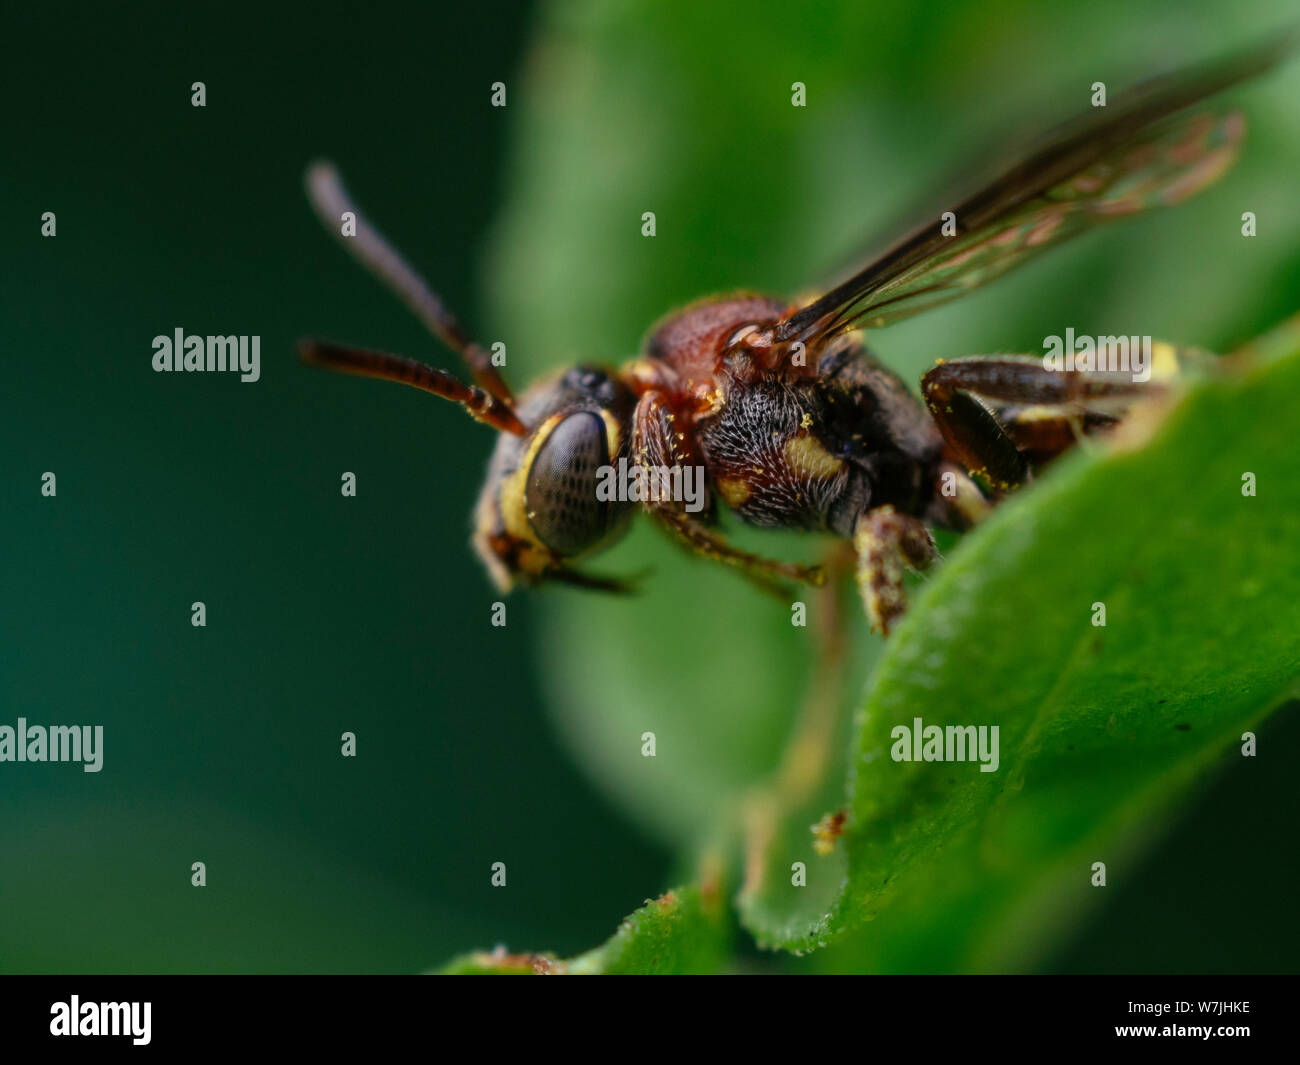 Small wasp-like bee from the Nomada genus, kleptoparasitoid of other bees, seen in a tropical garden in Brazil Stock Photo